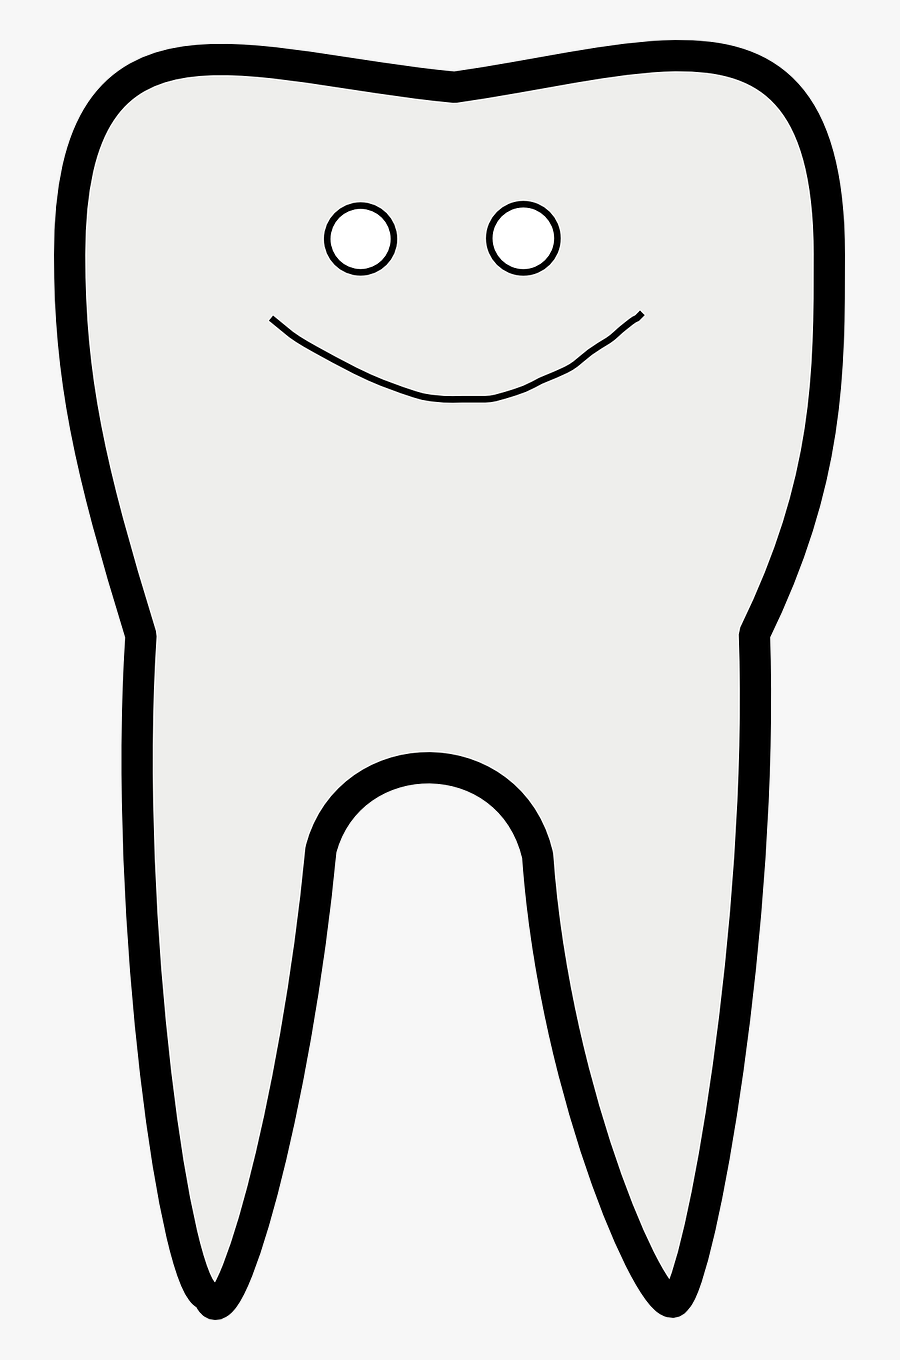 Tooth Line Art Free Vector - Tooth Clipart, Transparent Clipart